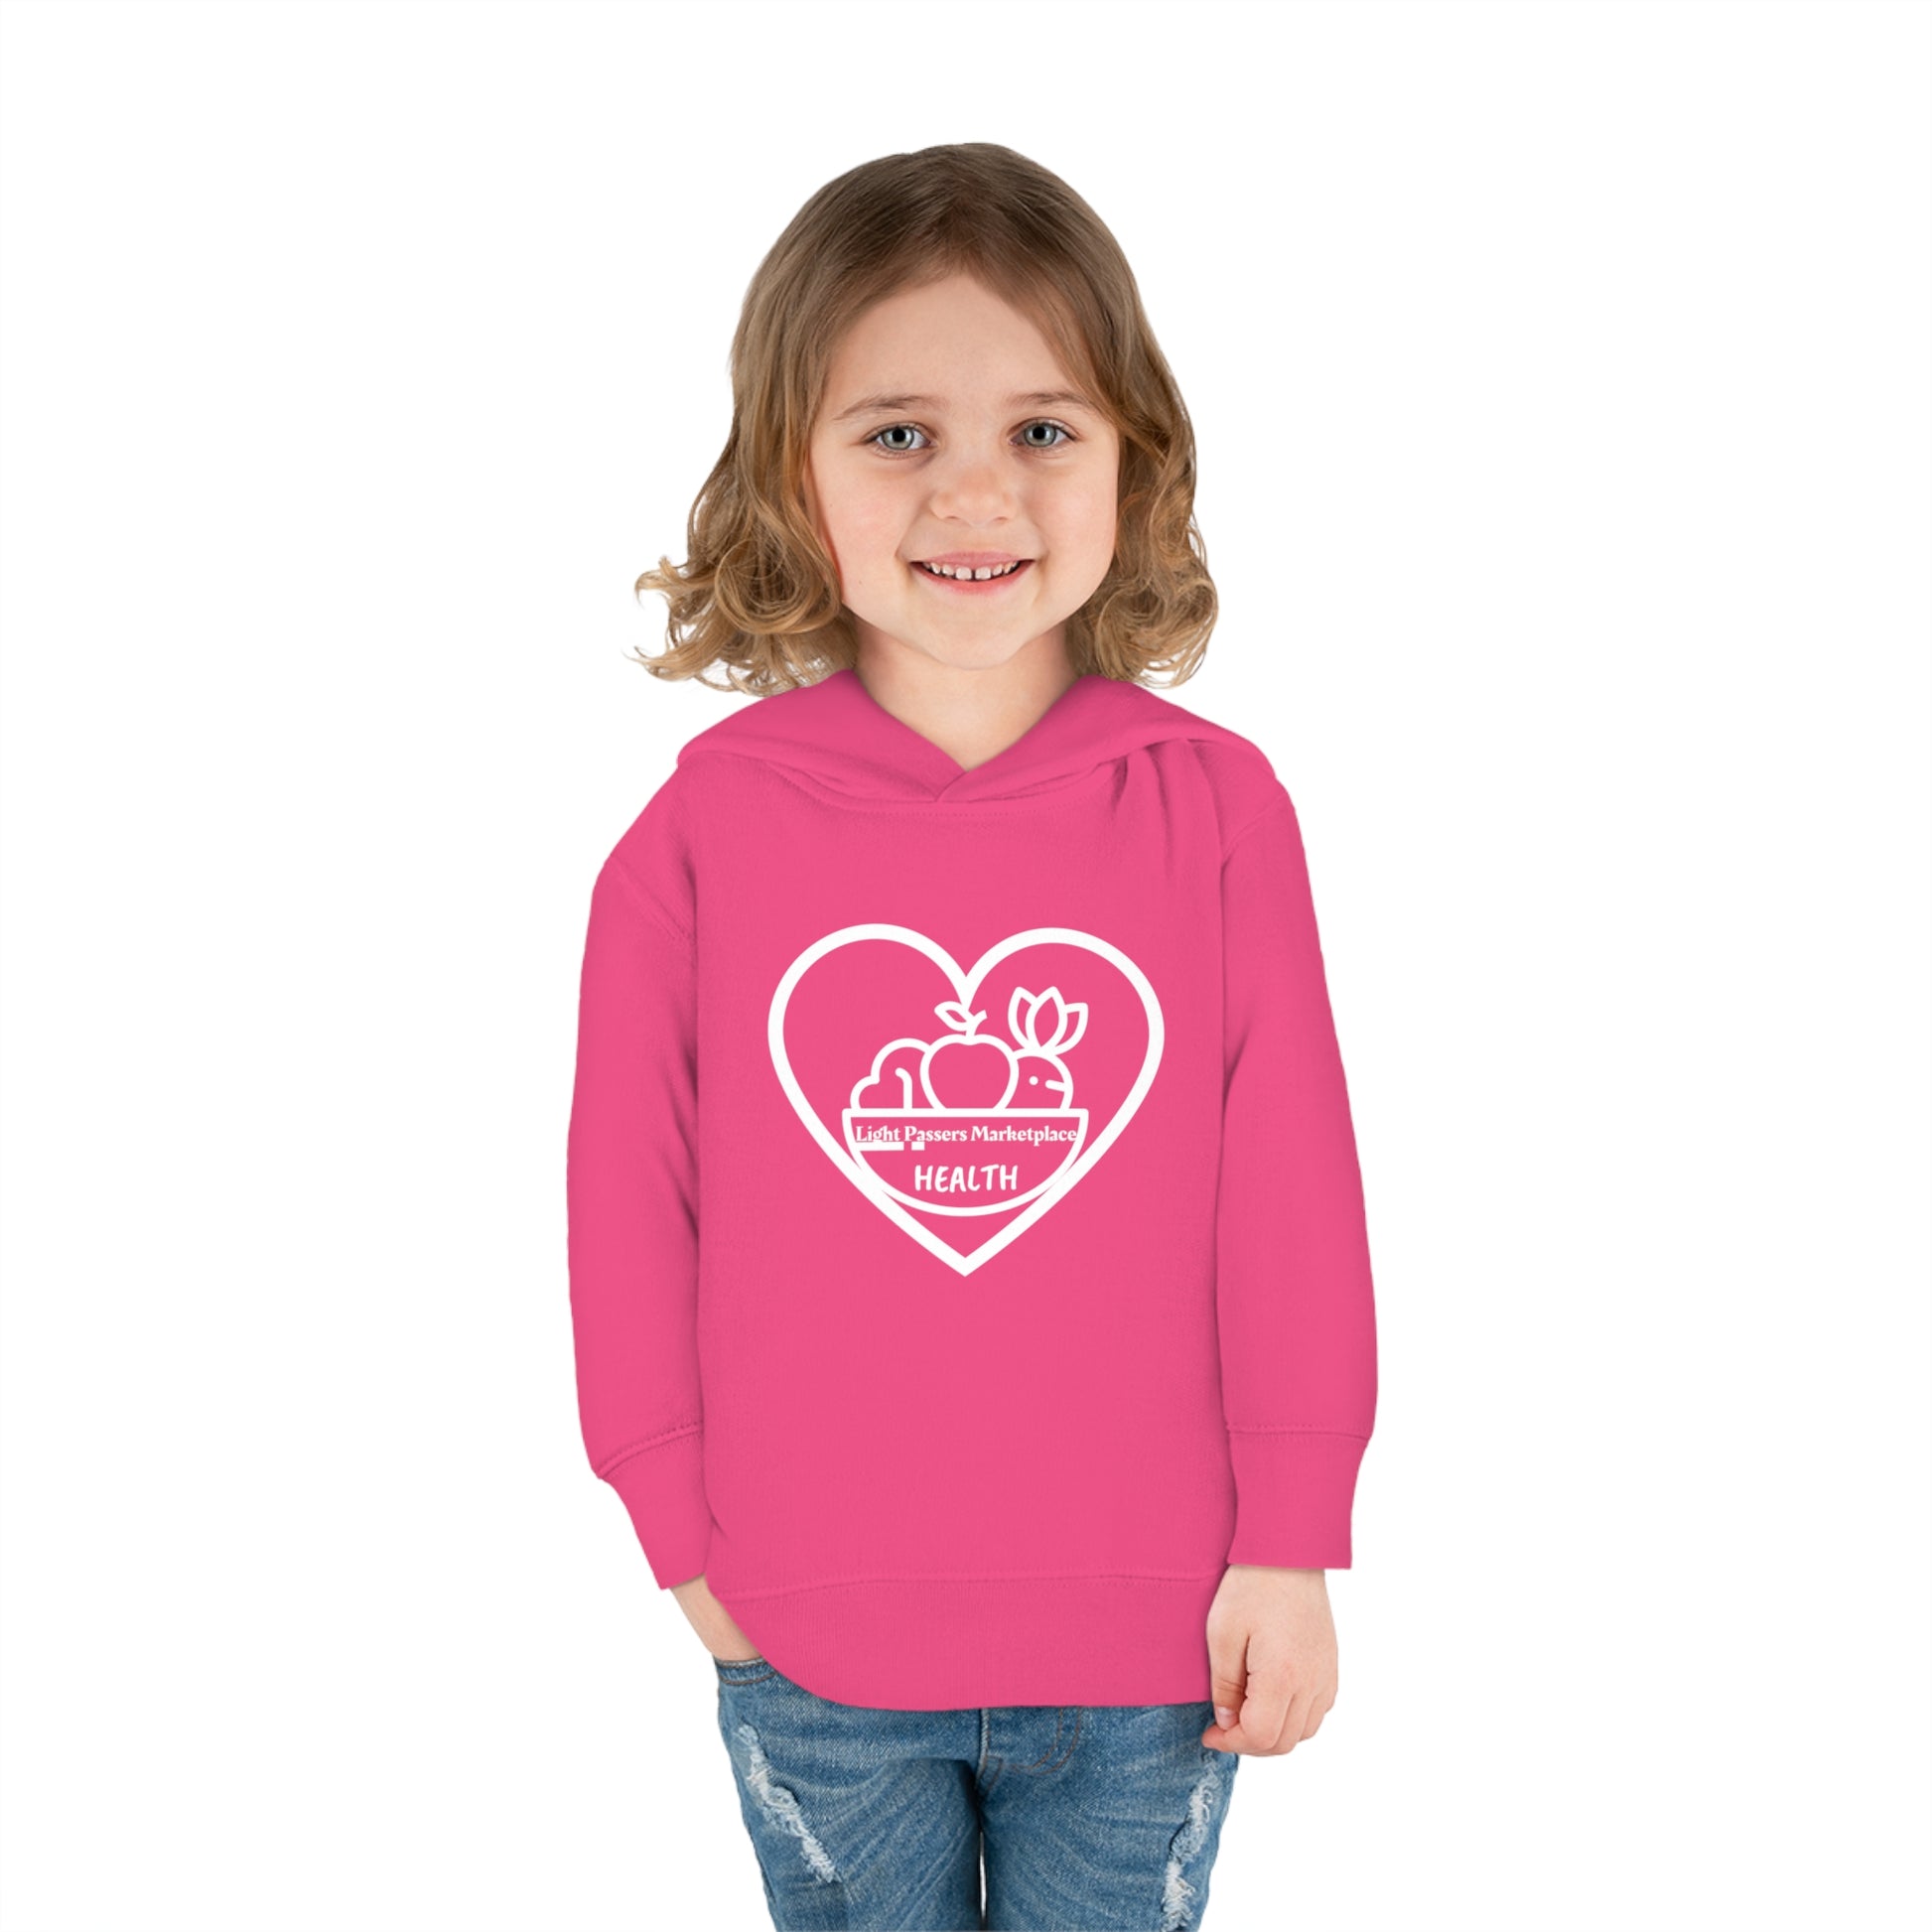 A toddler wearing a pink Rabbit Skins hoodie with a heart and logo, featuring a jersey-lined hood, cover-stitched details, and side seam pockets for cozy durability.